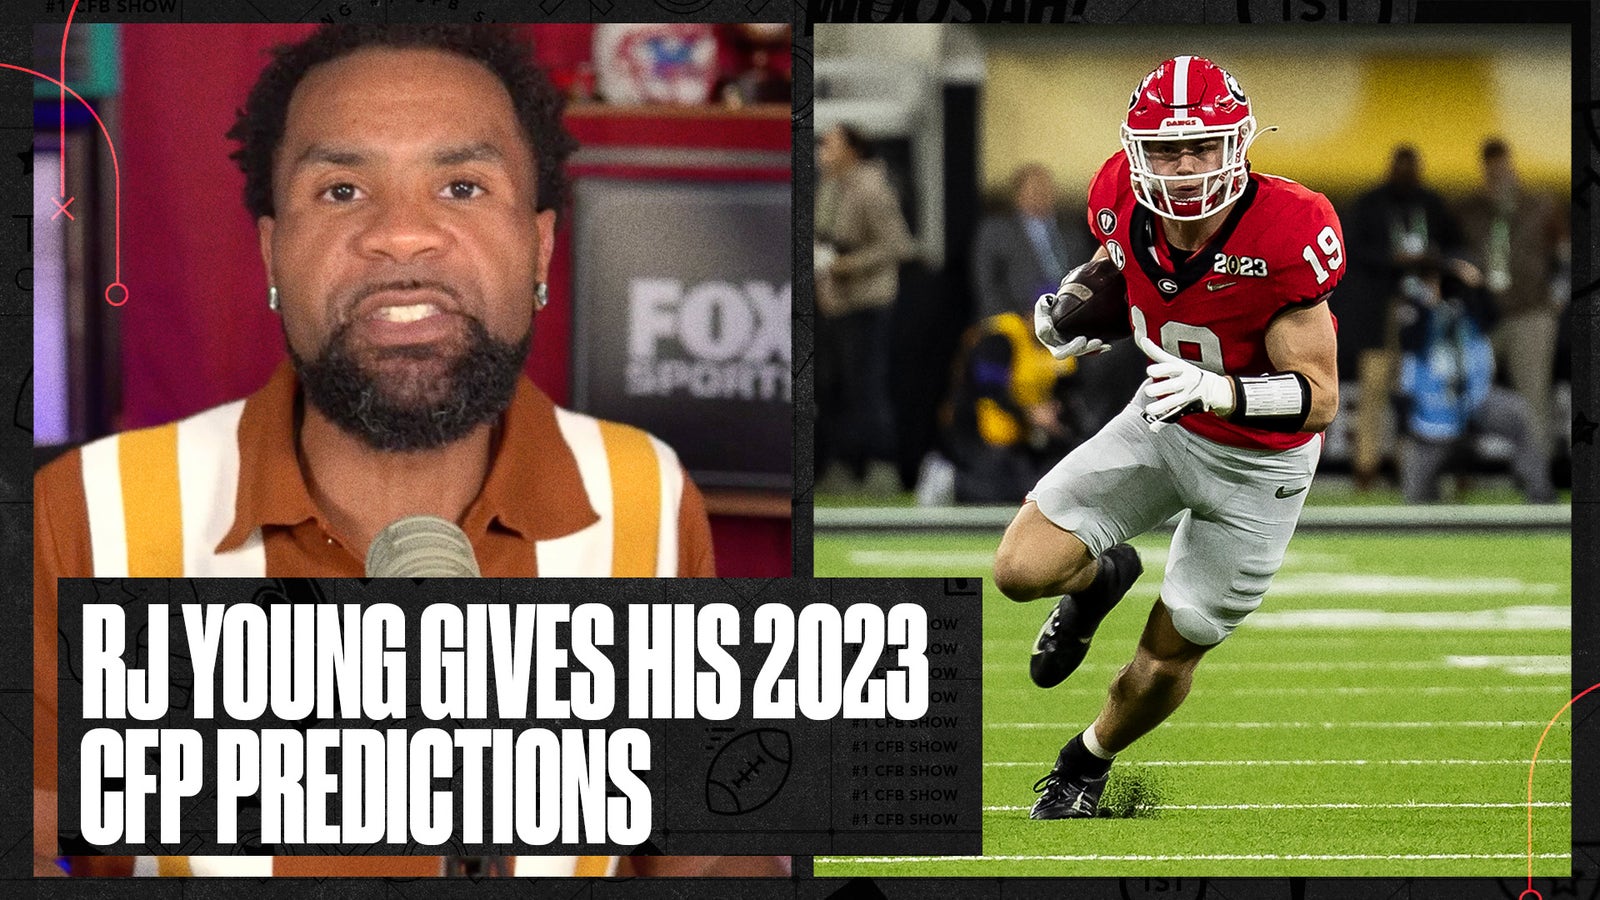 RJ Young gives his 2023 CFP predictions: Can Georgia 3-peat?